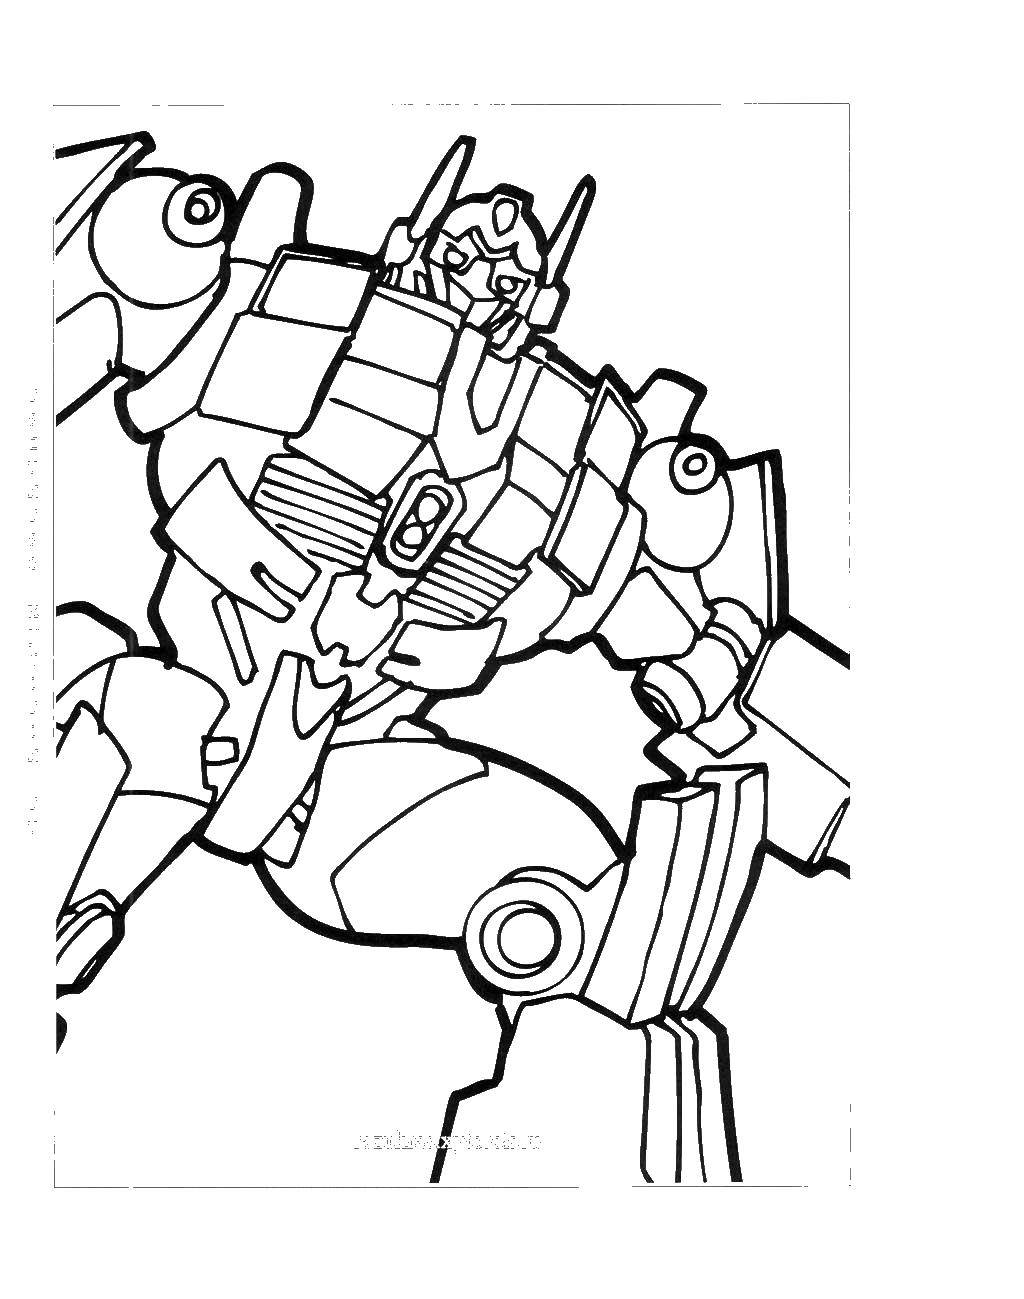 Coloring Transformer. Category robots. Tags:  the level, robots, robot.